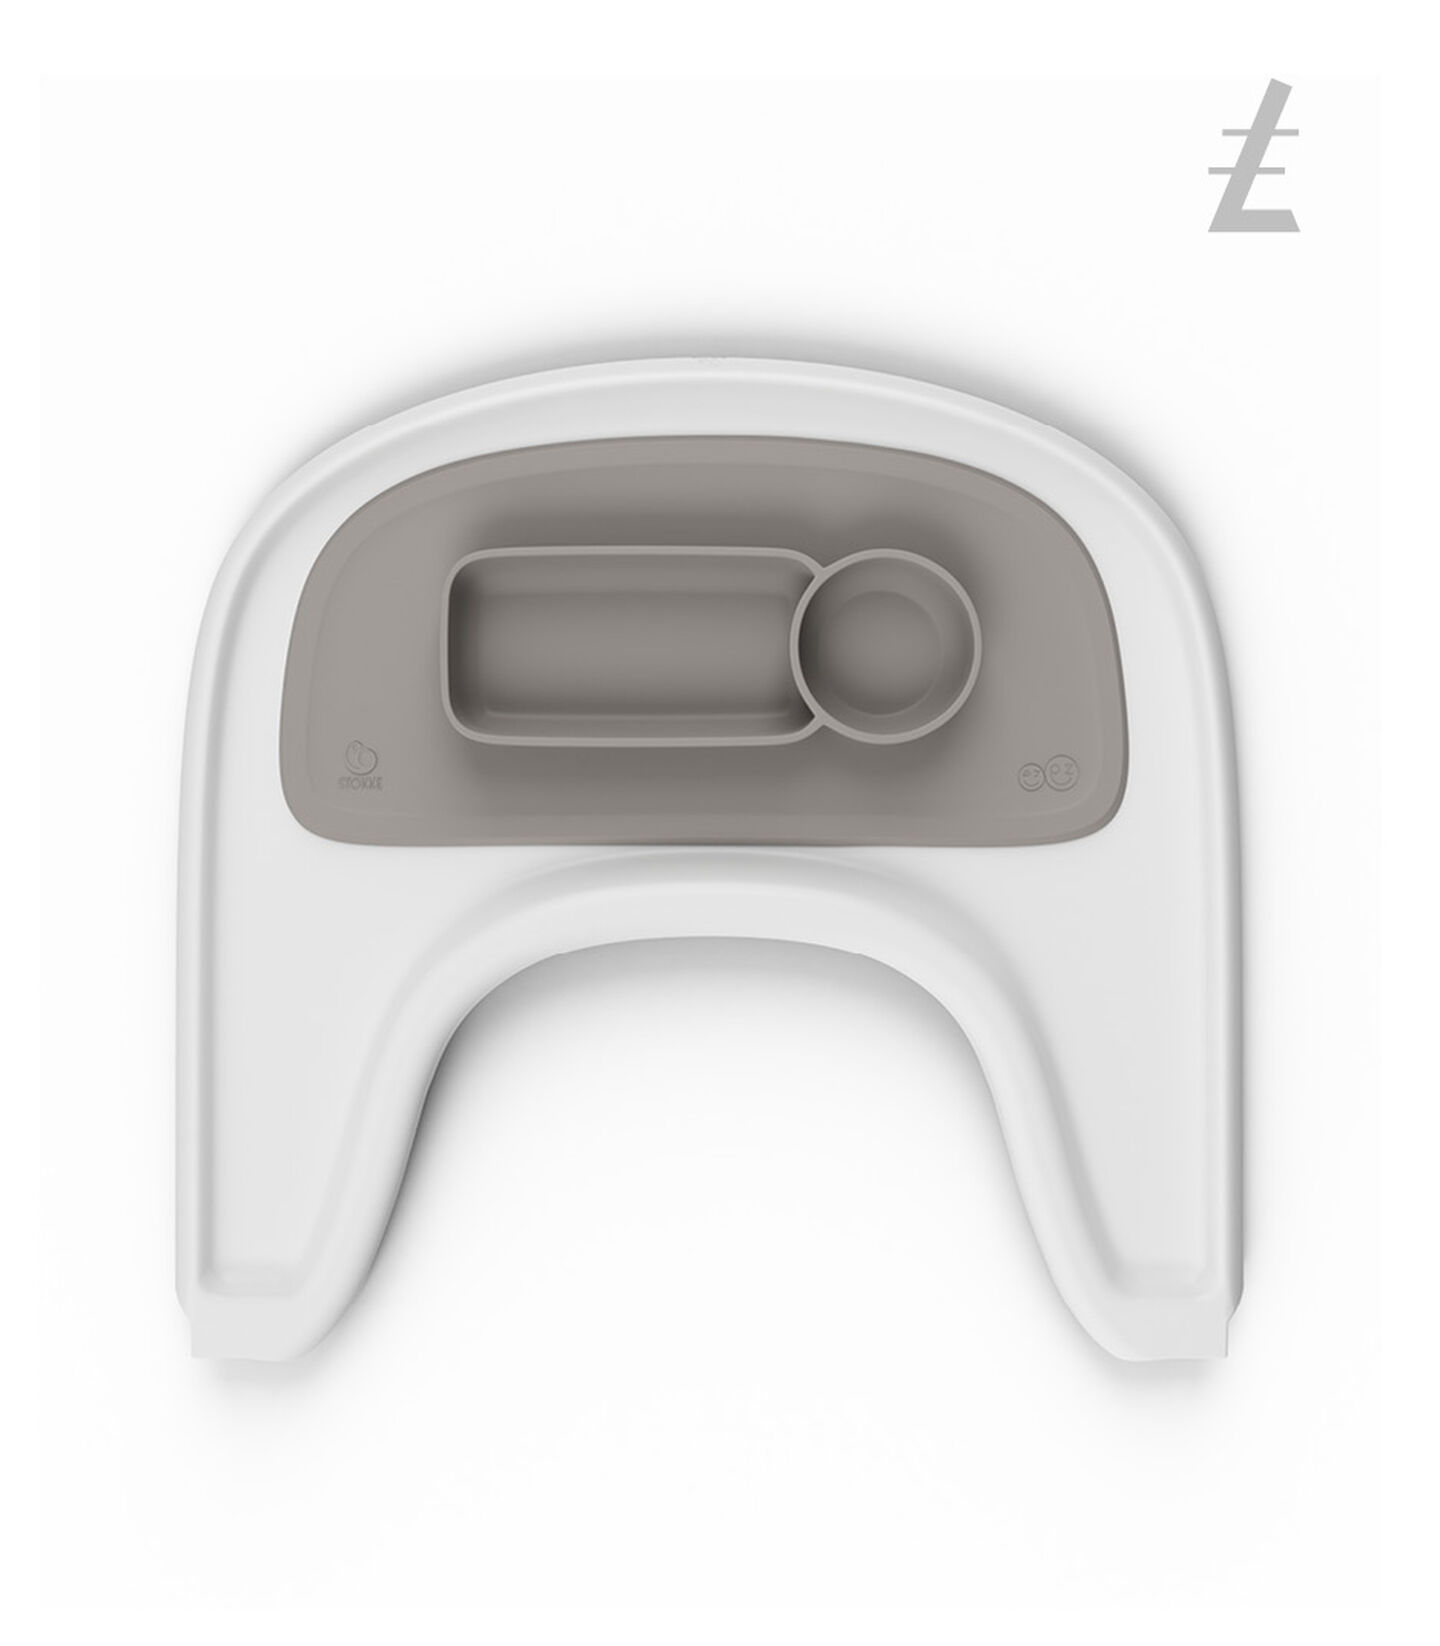 ezpz™ by Stokke™ placemat for Stokke® Tray Soft Grey, Soft Grey, mainview view 3